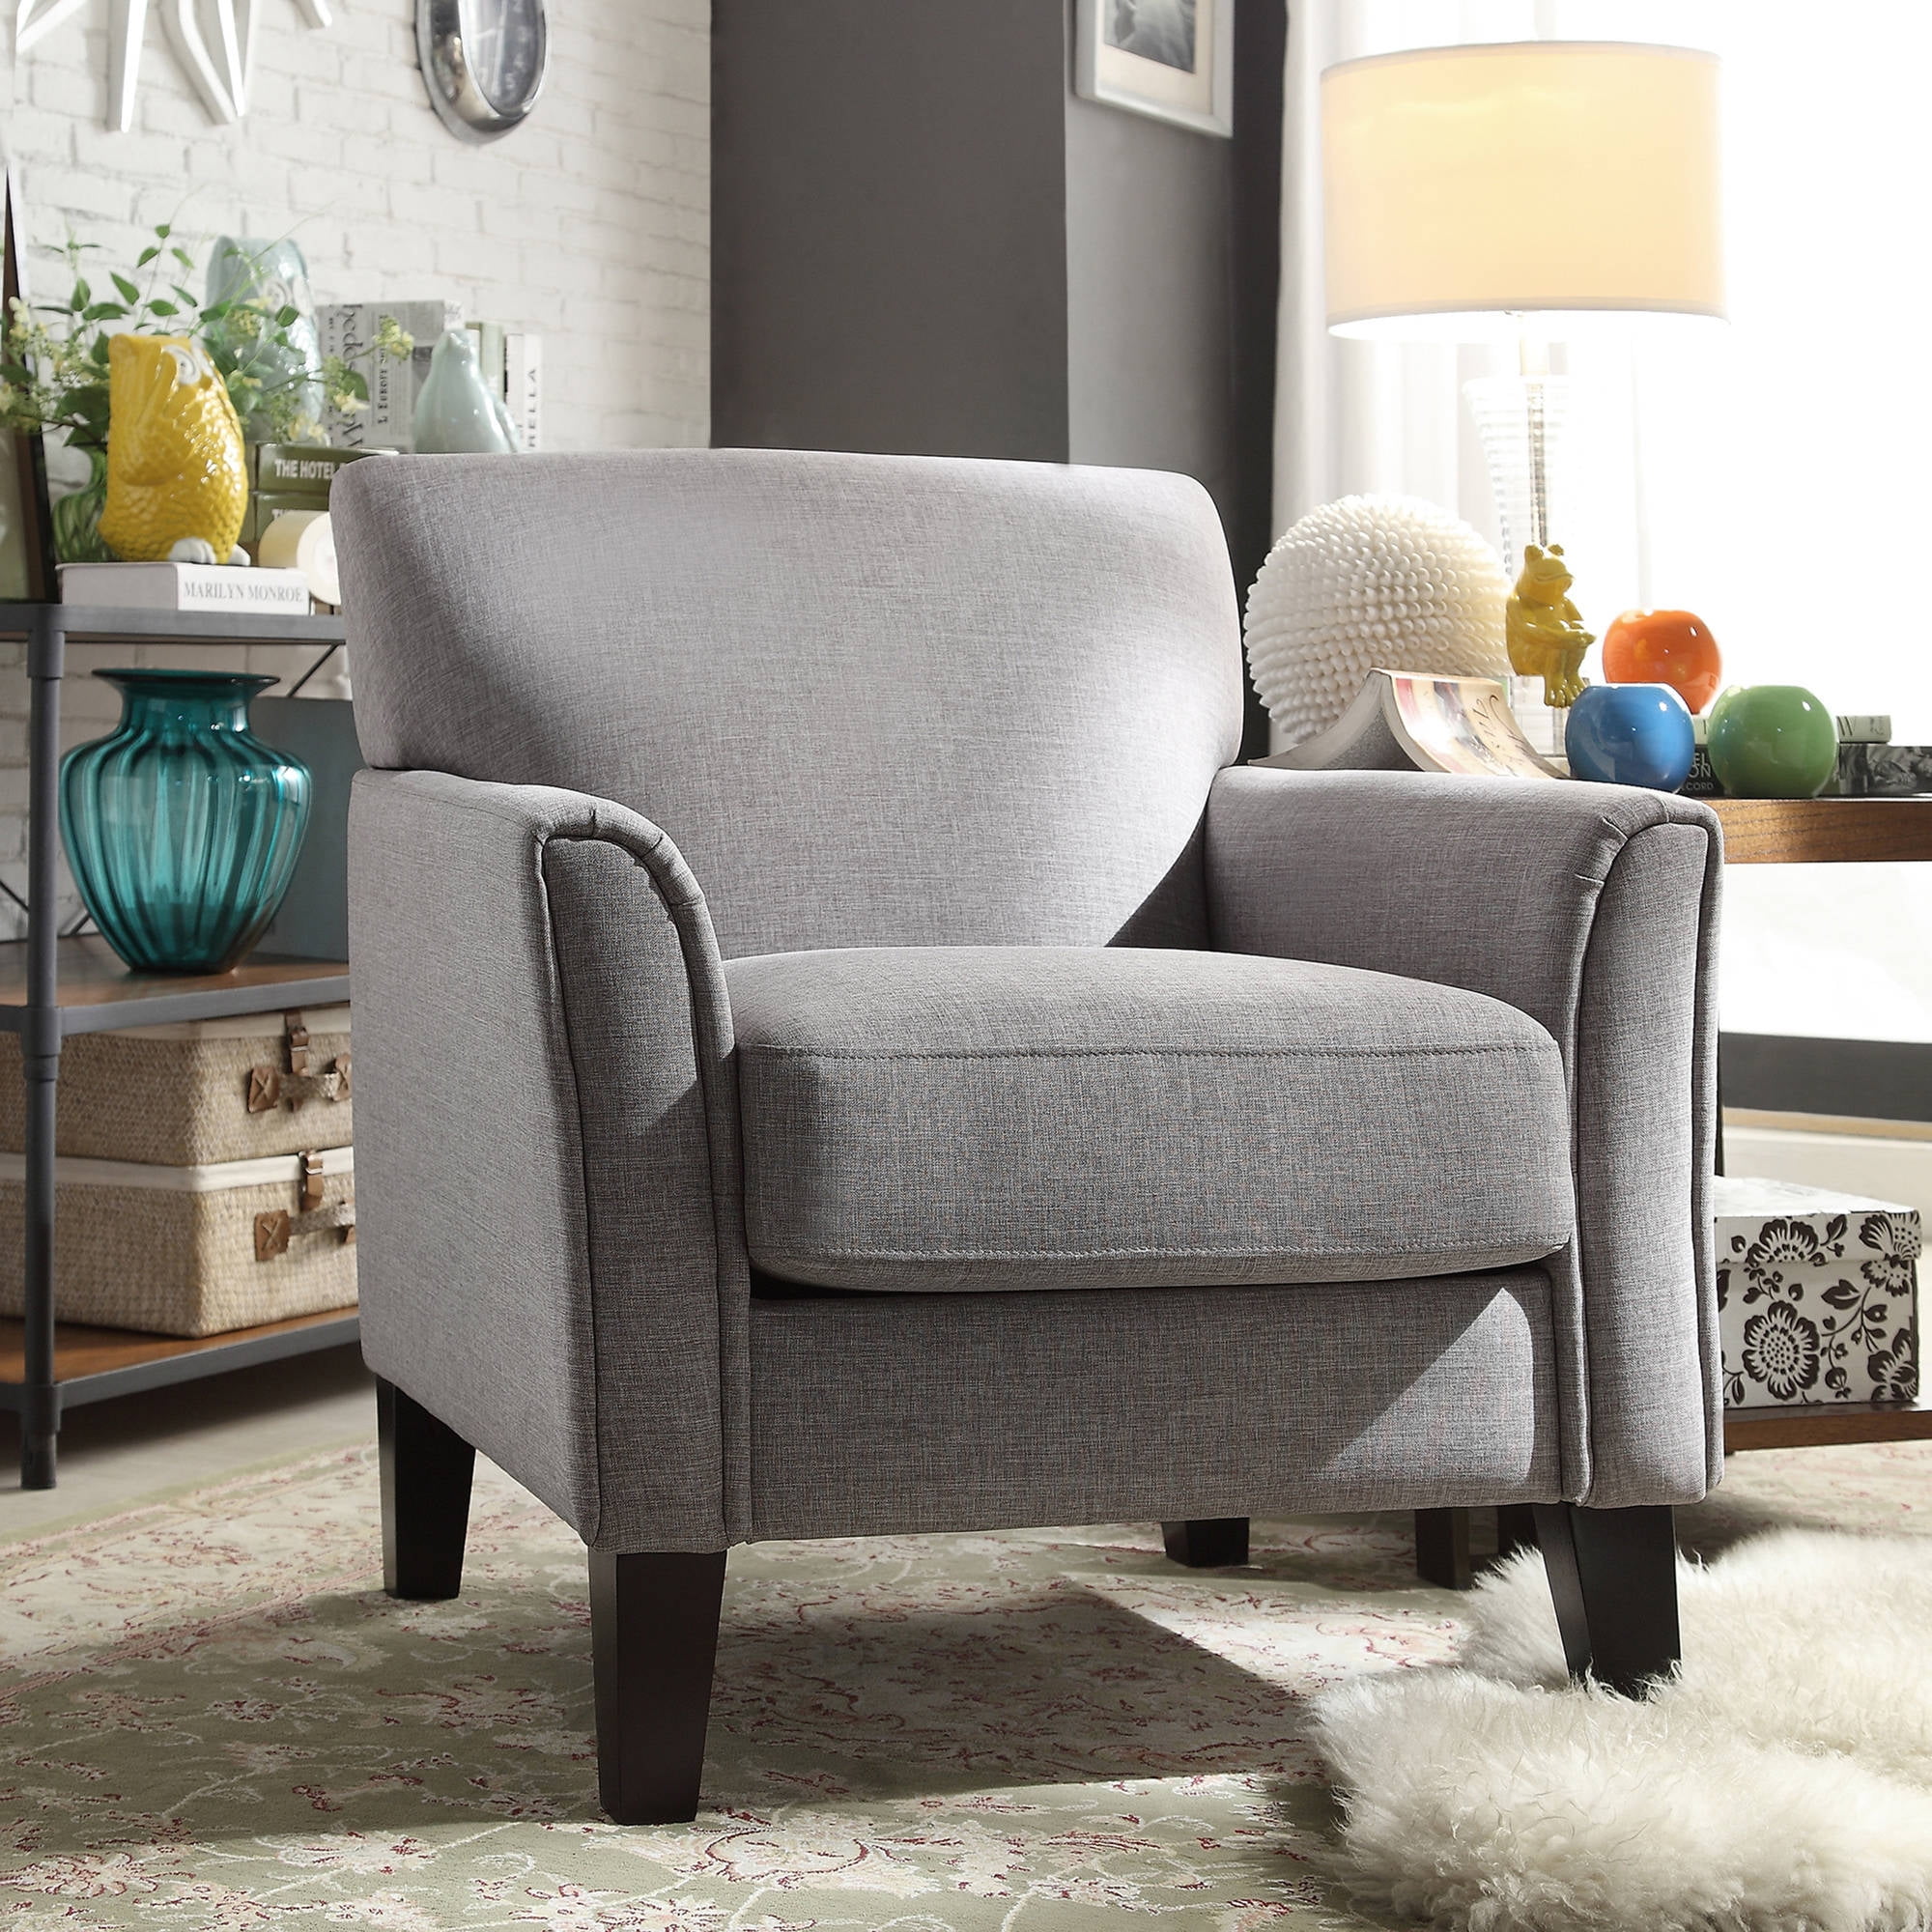 Weston Home Tribeca Living Room Upholstered Accent Chair